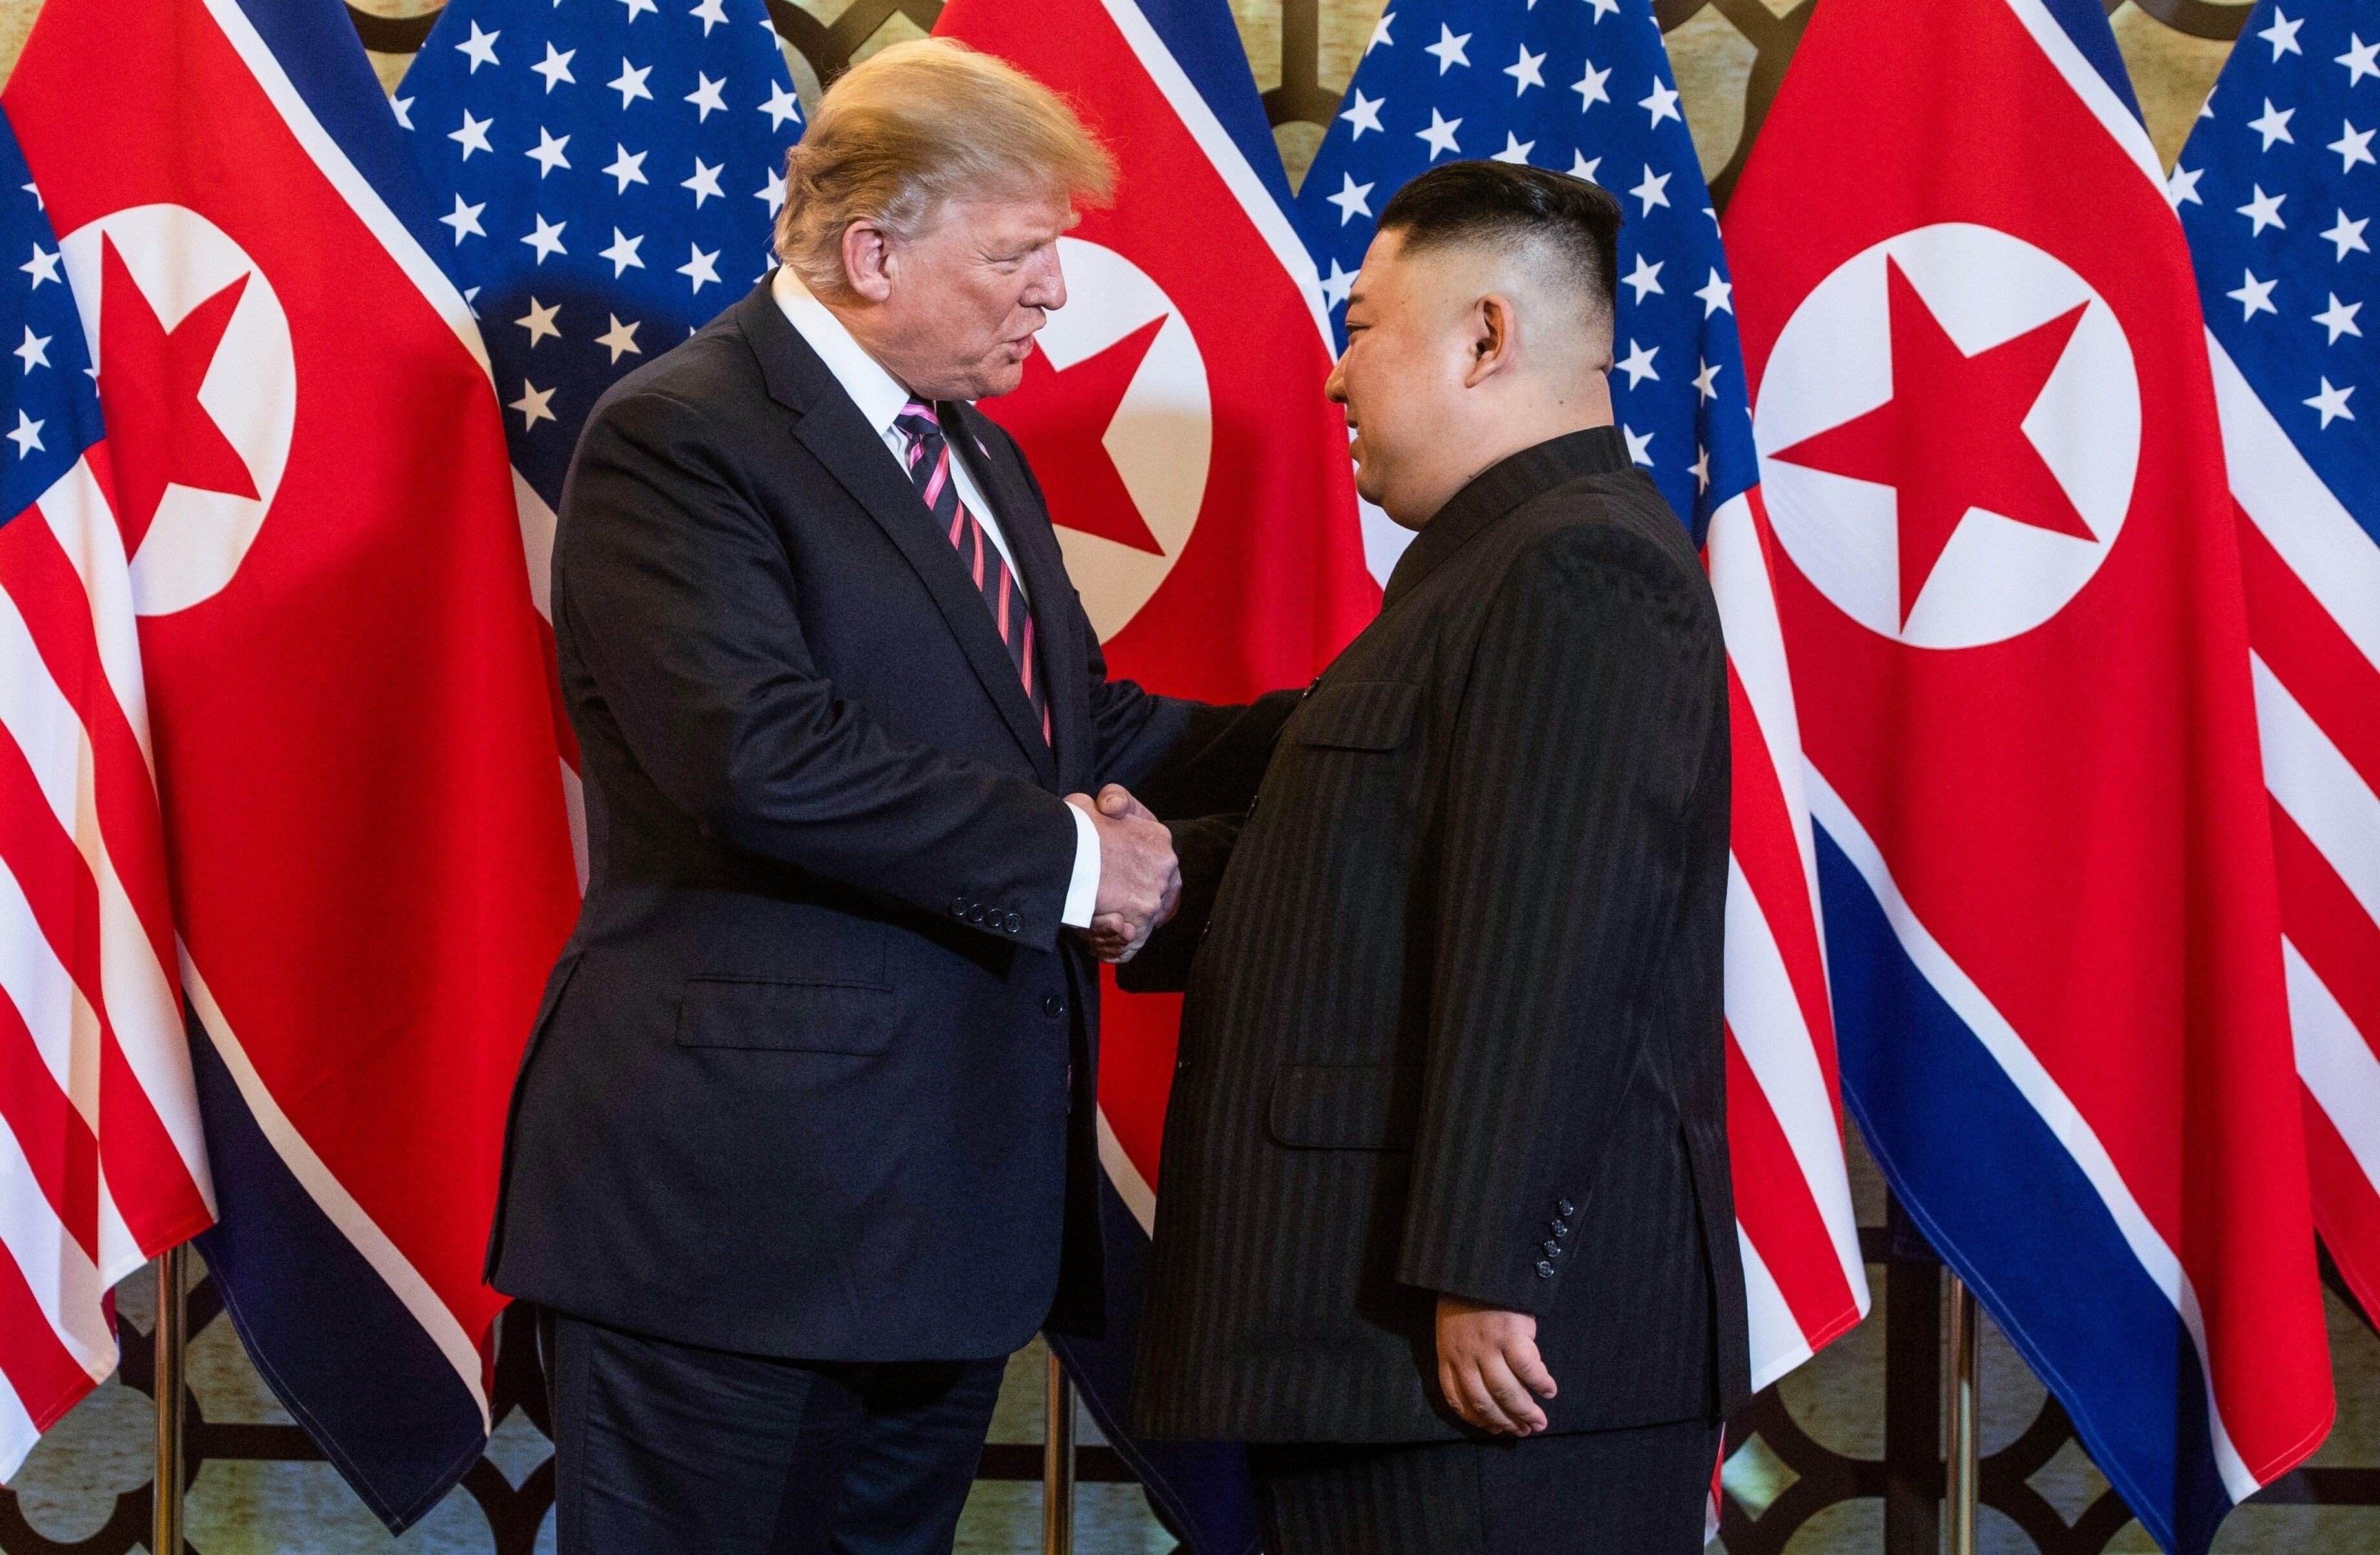 US President Donald Trump shakes hands with North Korean leader Kim Jong-un during the Hanoi summit in 2019. Photo: AFP